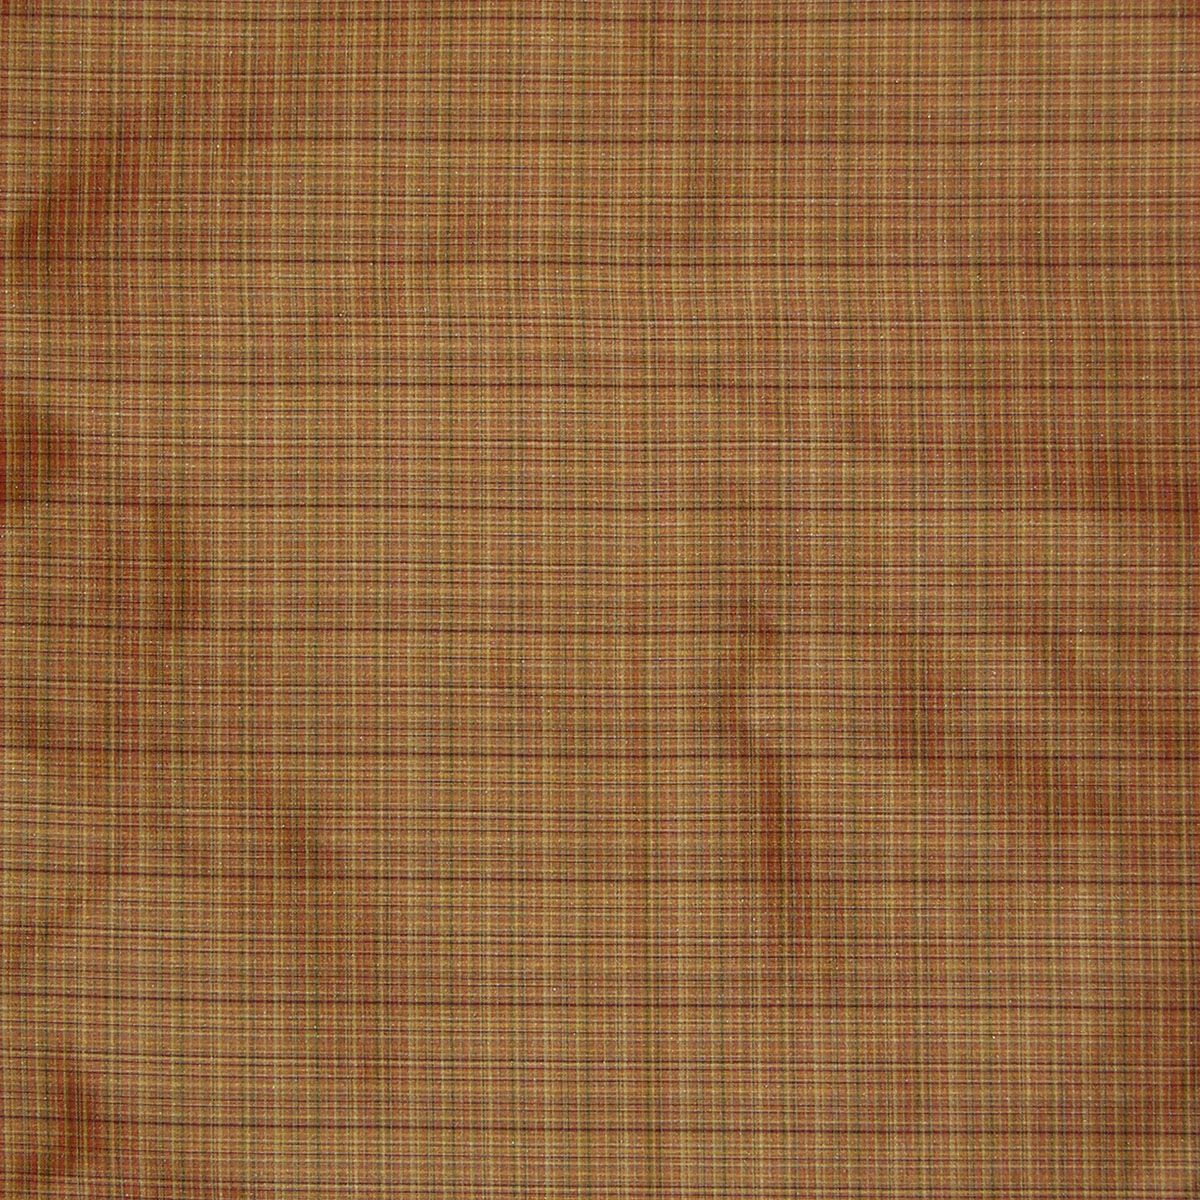 T &amp; A Check fabric in cinnabar color - pattern number SQ 00044308 - by Scalamandre in the Old World Weavers collection